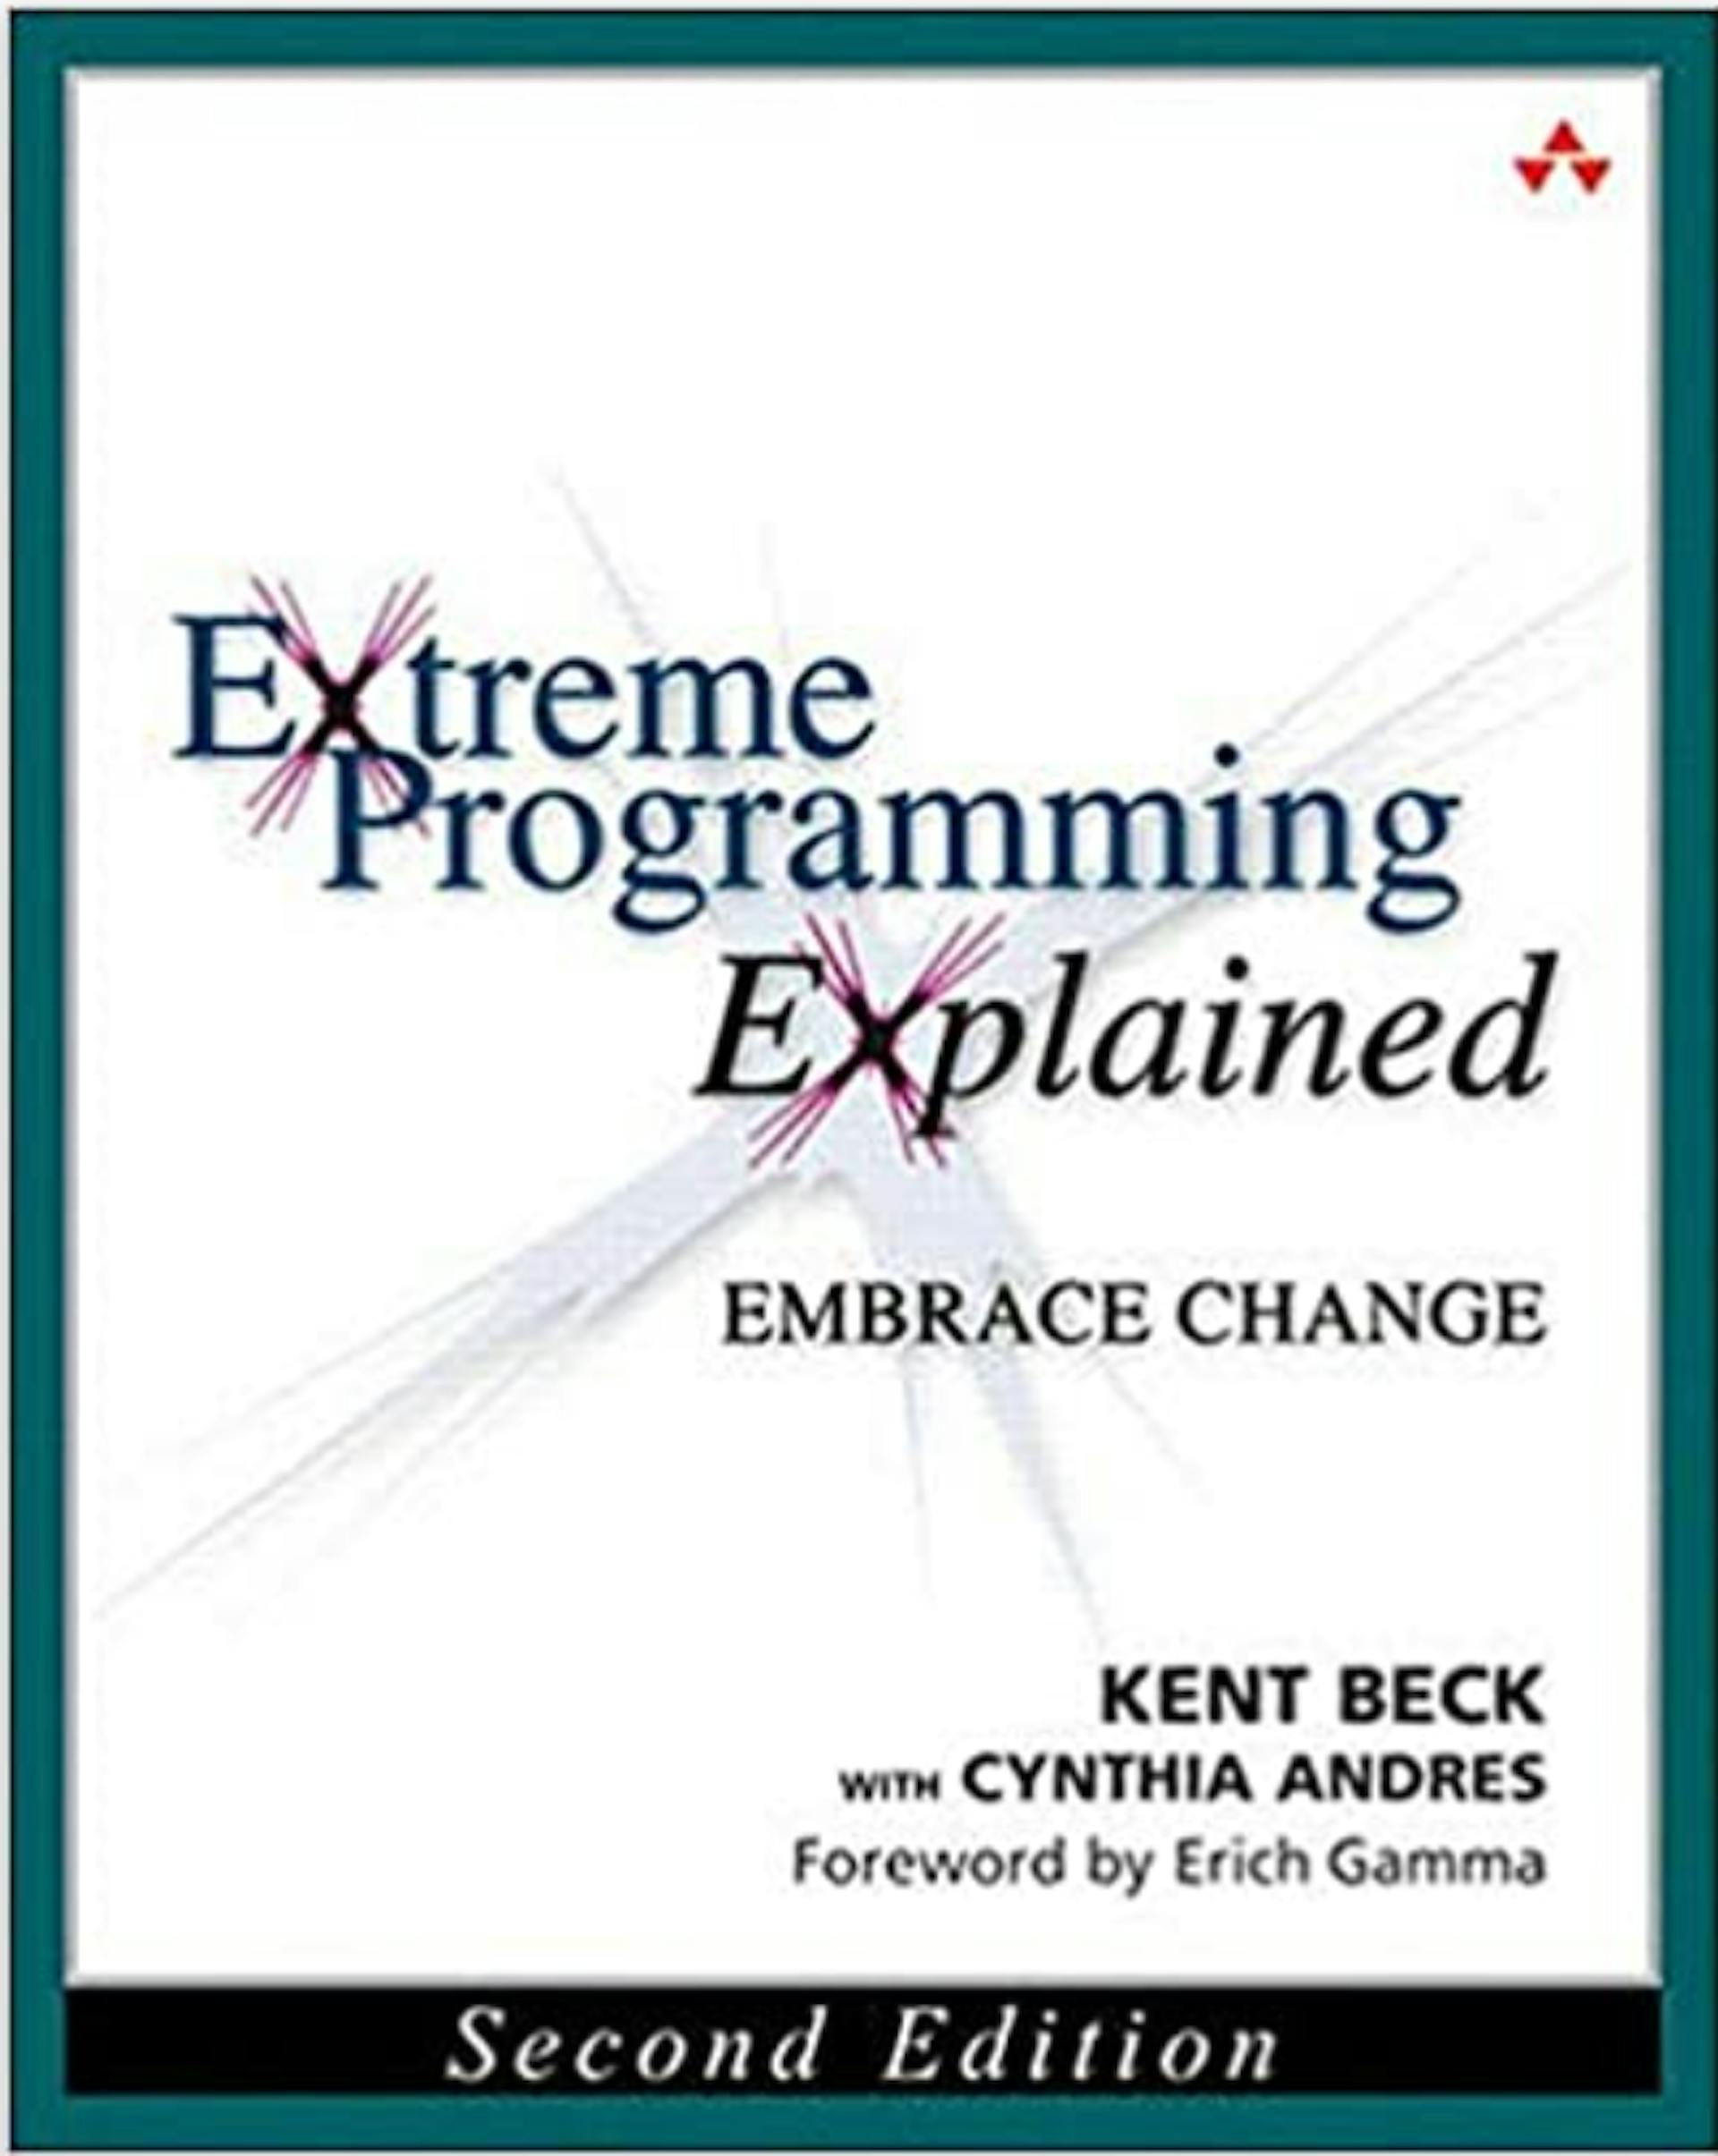 Extreme Programming Explained book